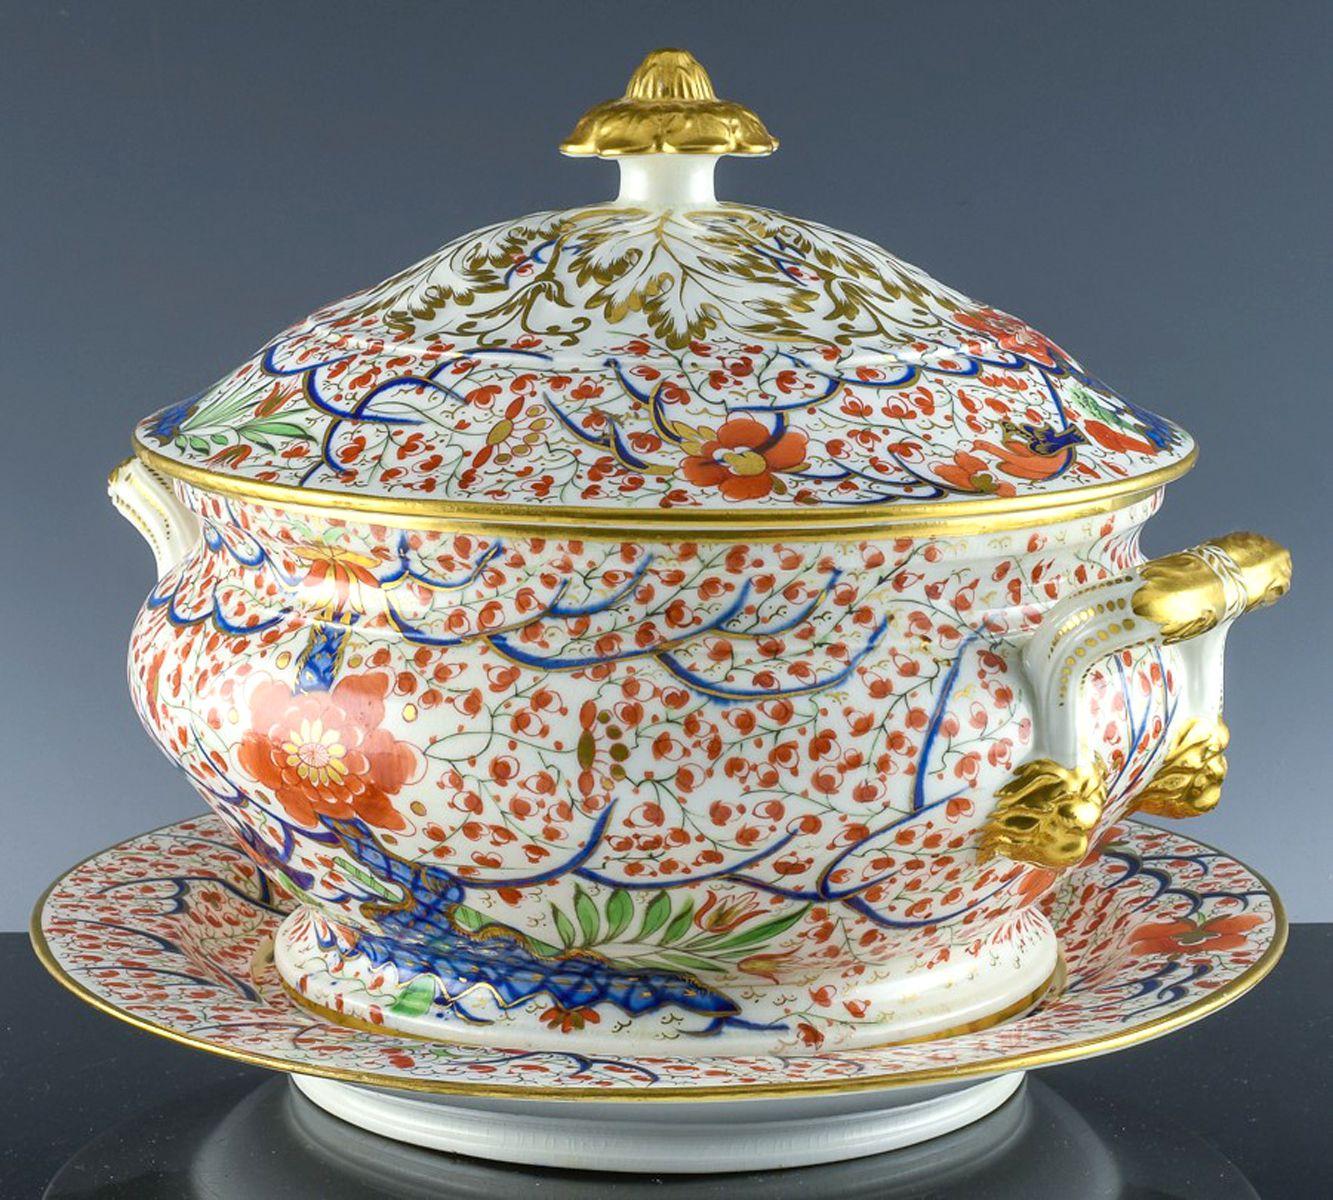 Regency Period Chamberlain Worcester Porcelain Soup Tureen, Cover and Stand For Sale 1